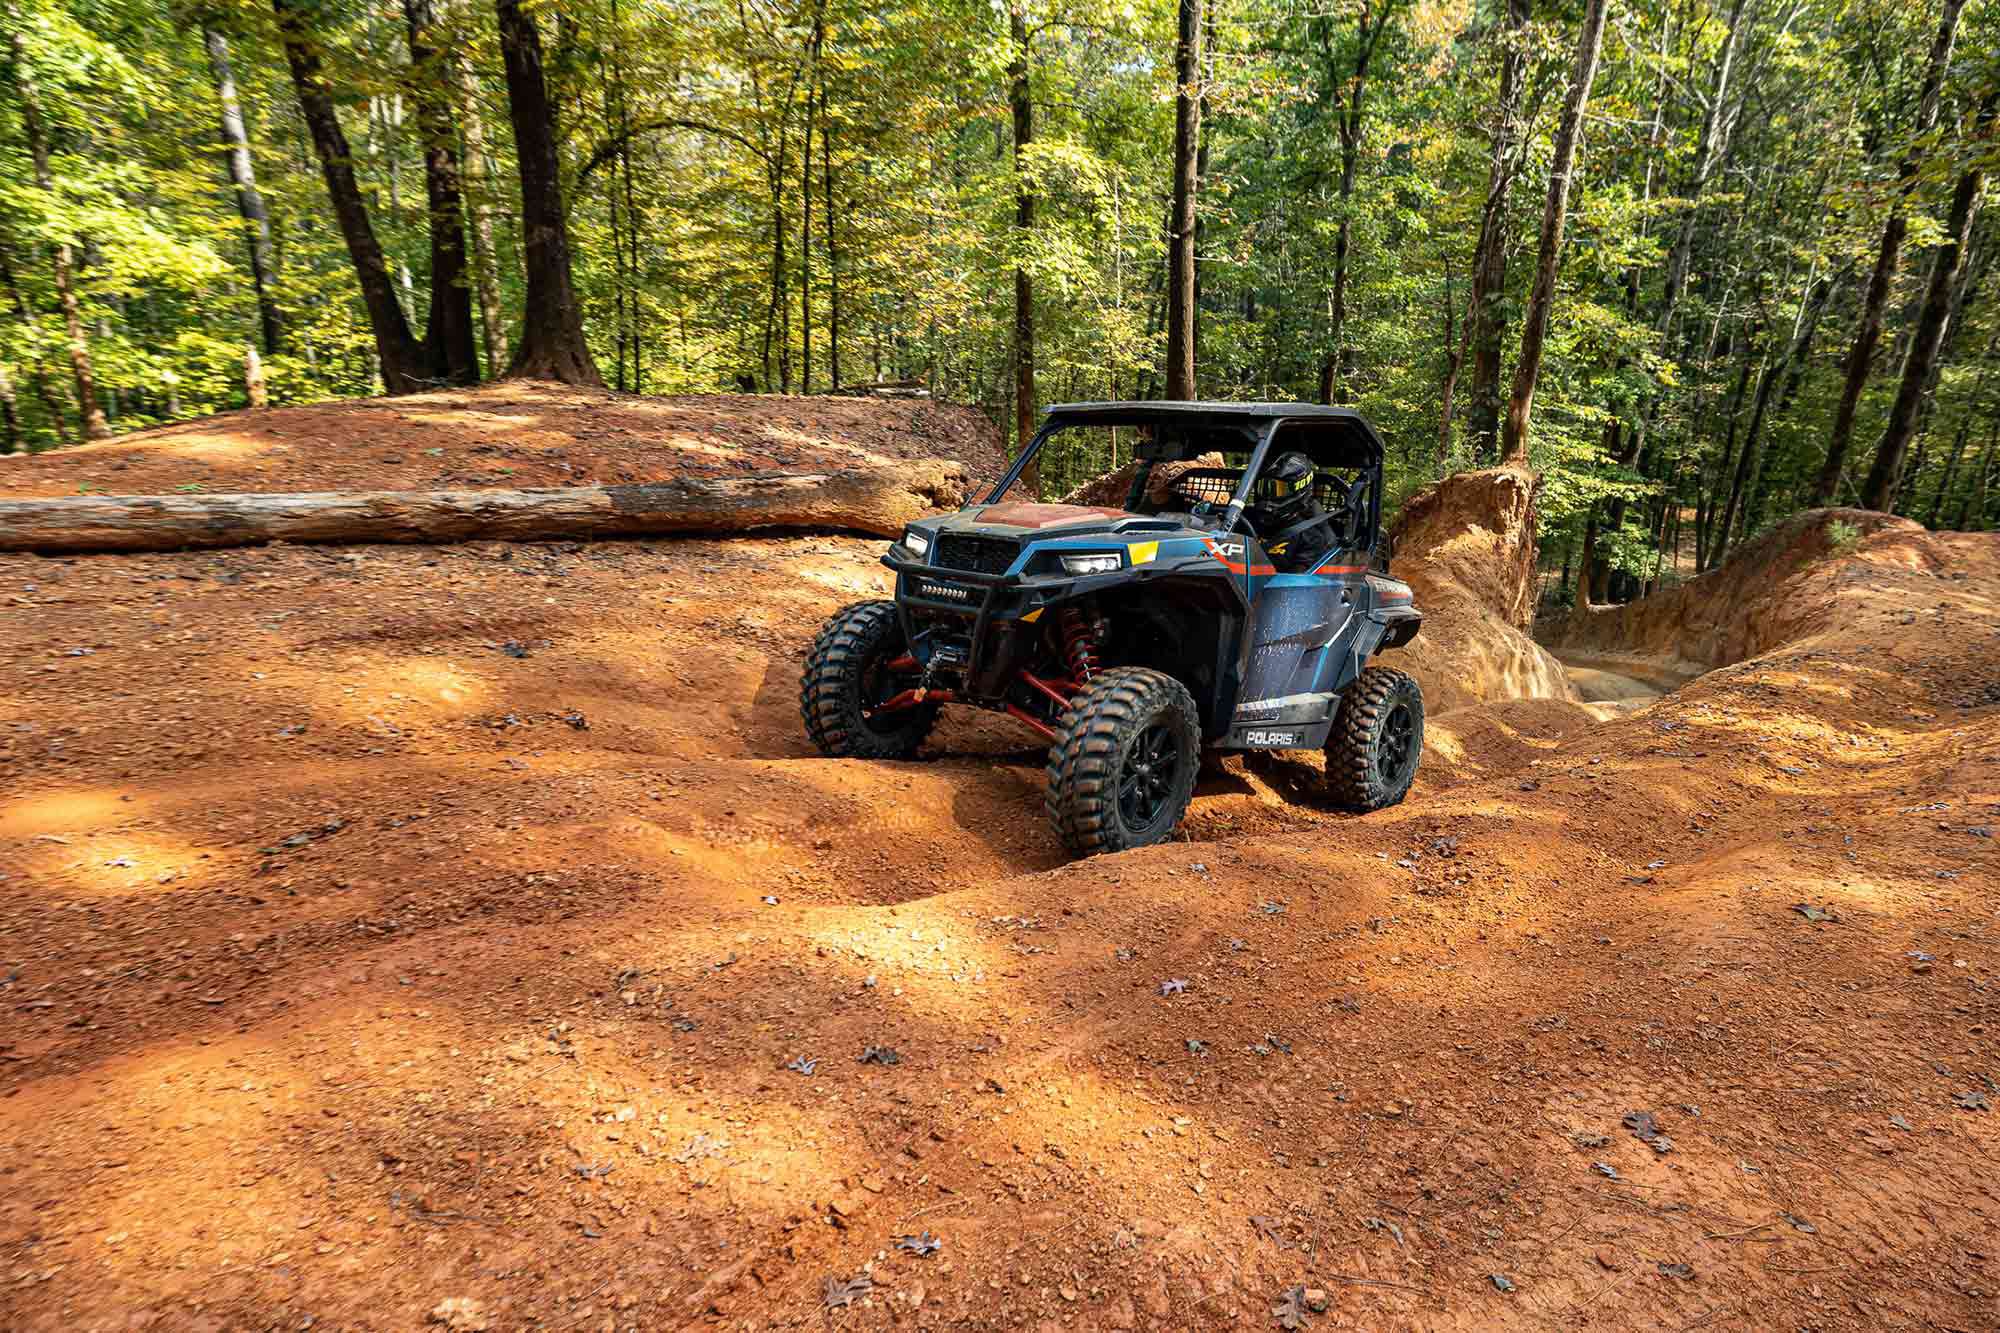 At Durhamtown’s hill climbs, the General proved it’s as good when the going gets steep and rutted as it is at flying along flowing trails.